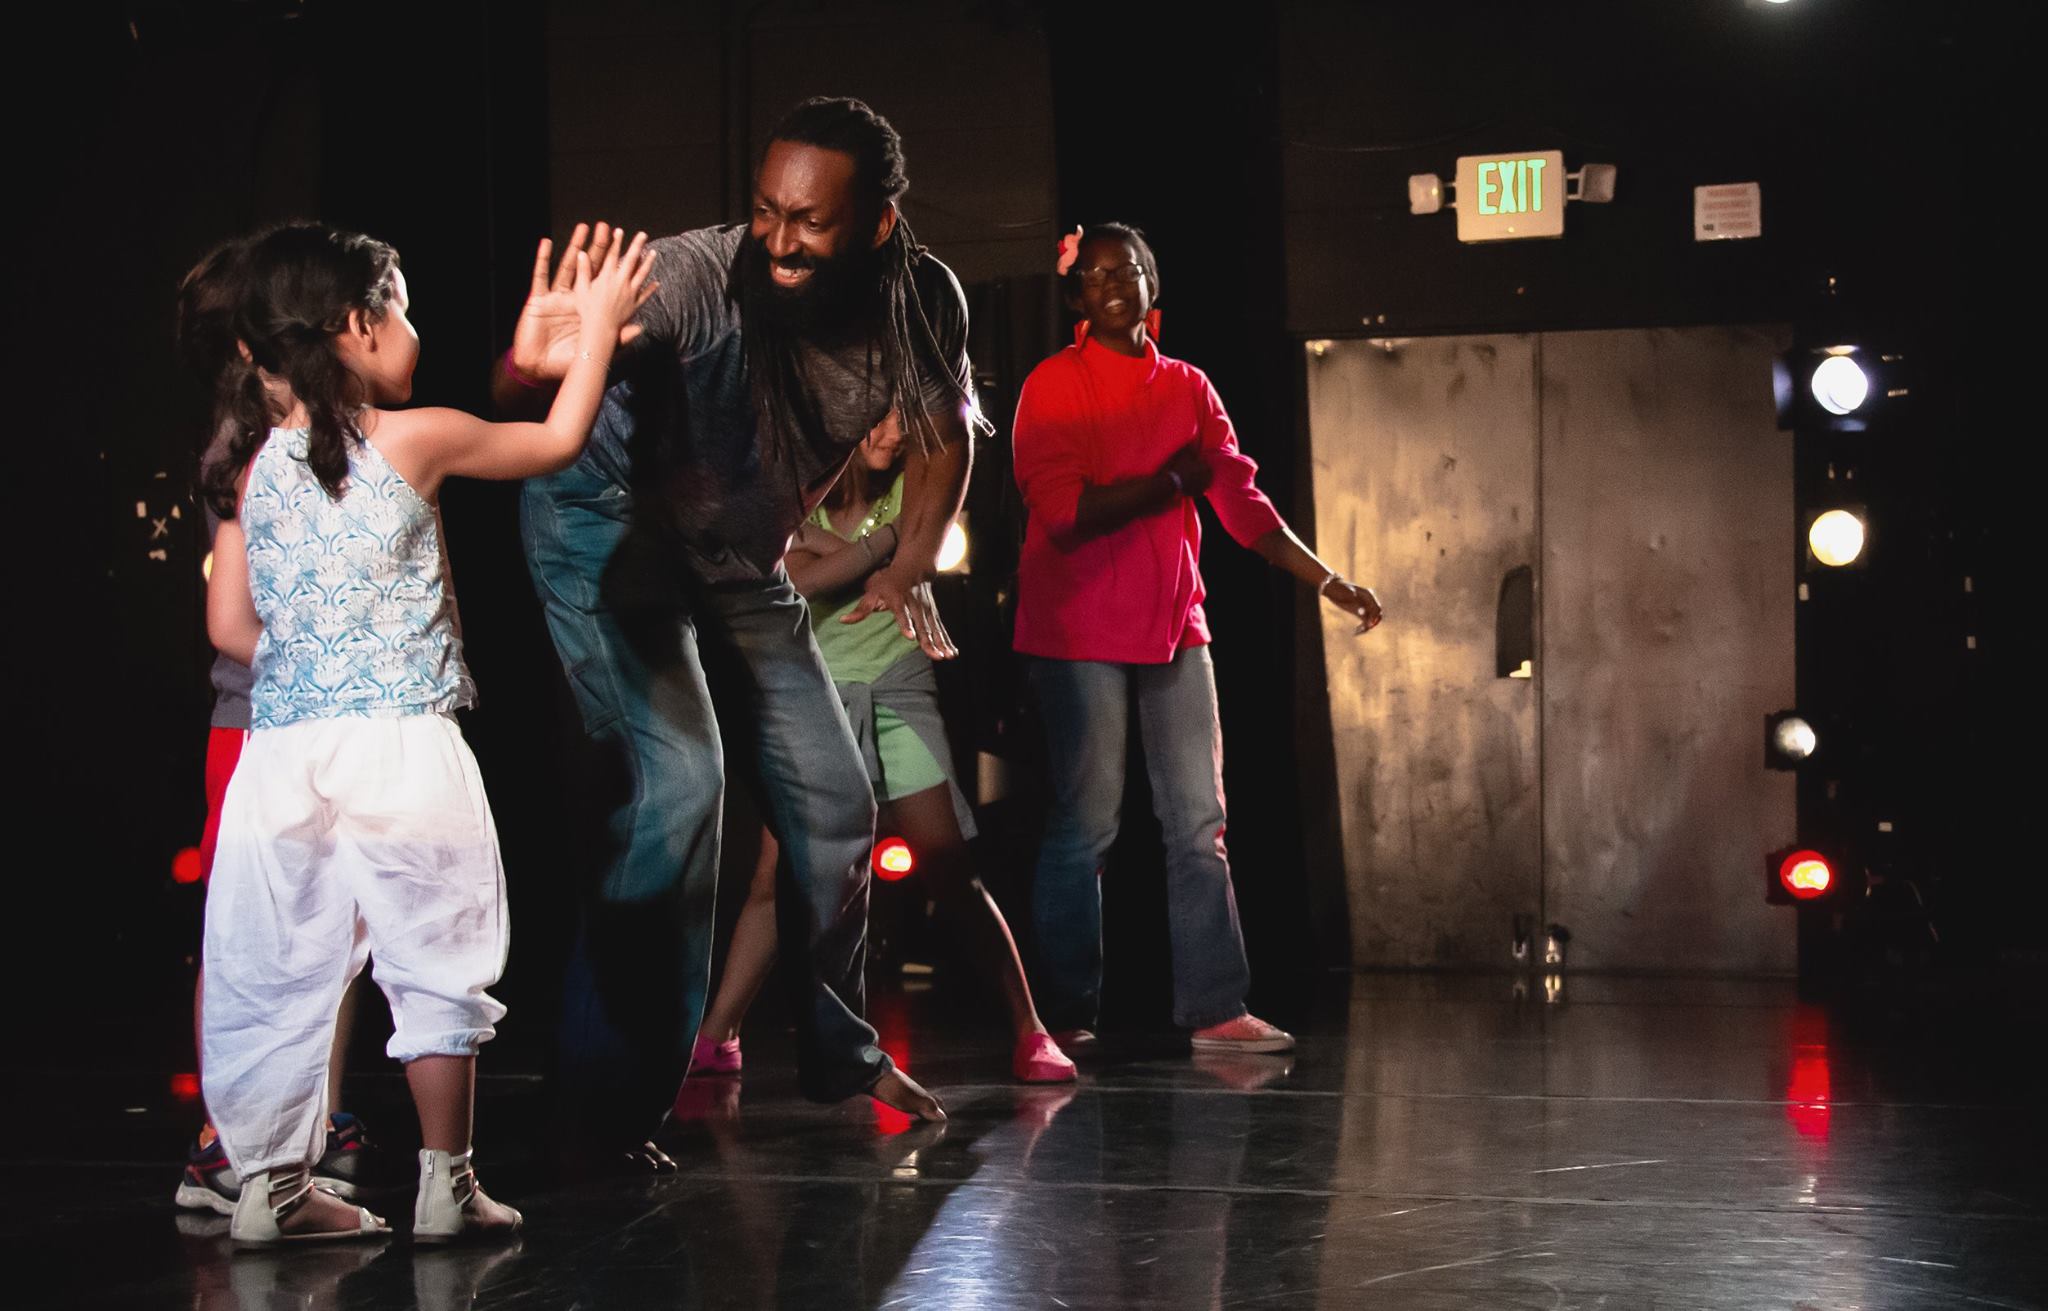 Antoine Hunter, a Native American African-American person with dark chocolate skin from his mother, almond shaped eyes with long lashes, and black dreadlocks and a full beard, leans forward to high five a young dancer.